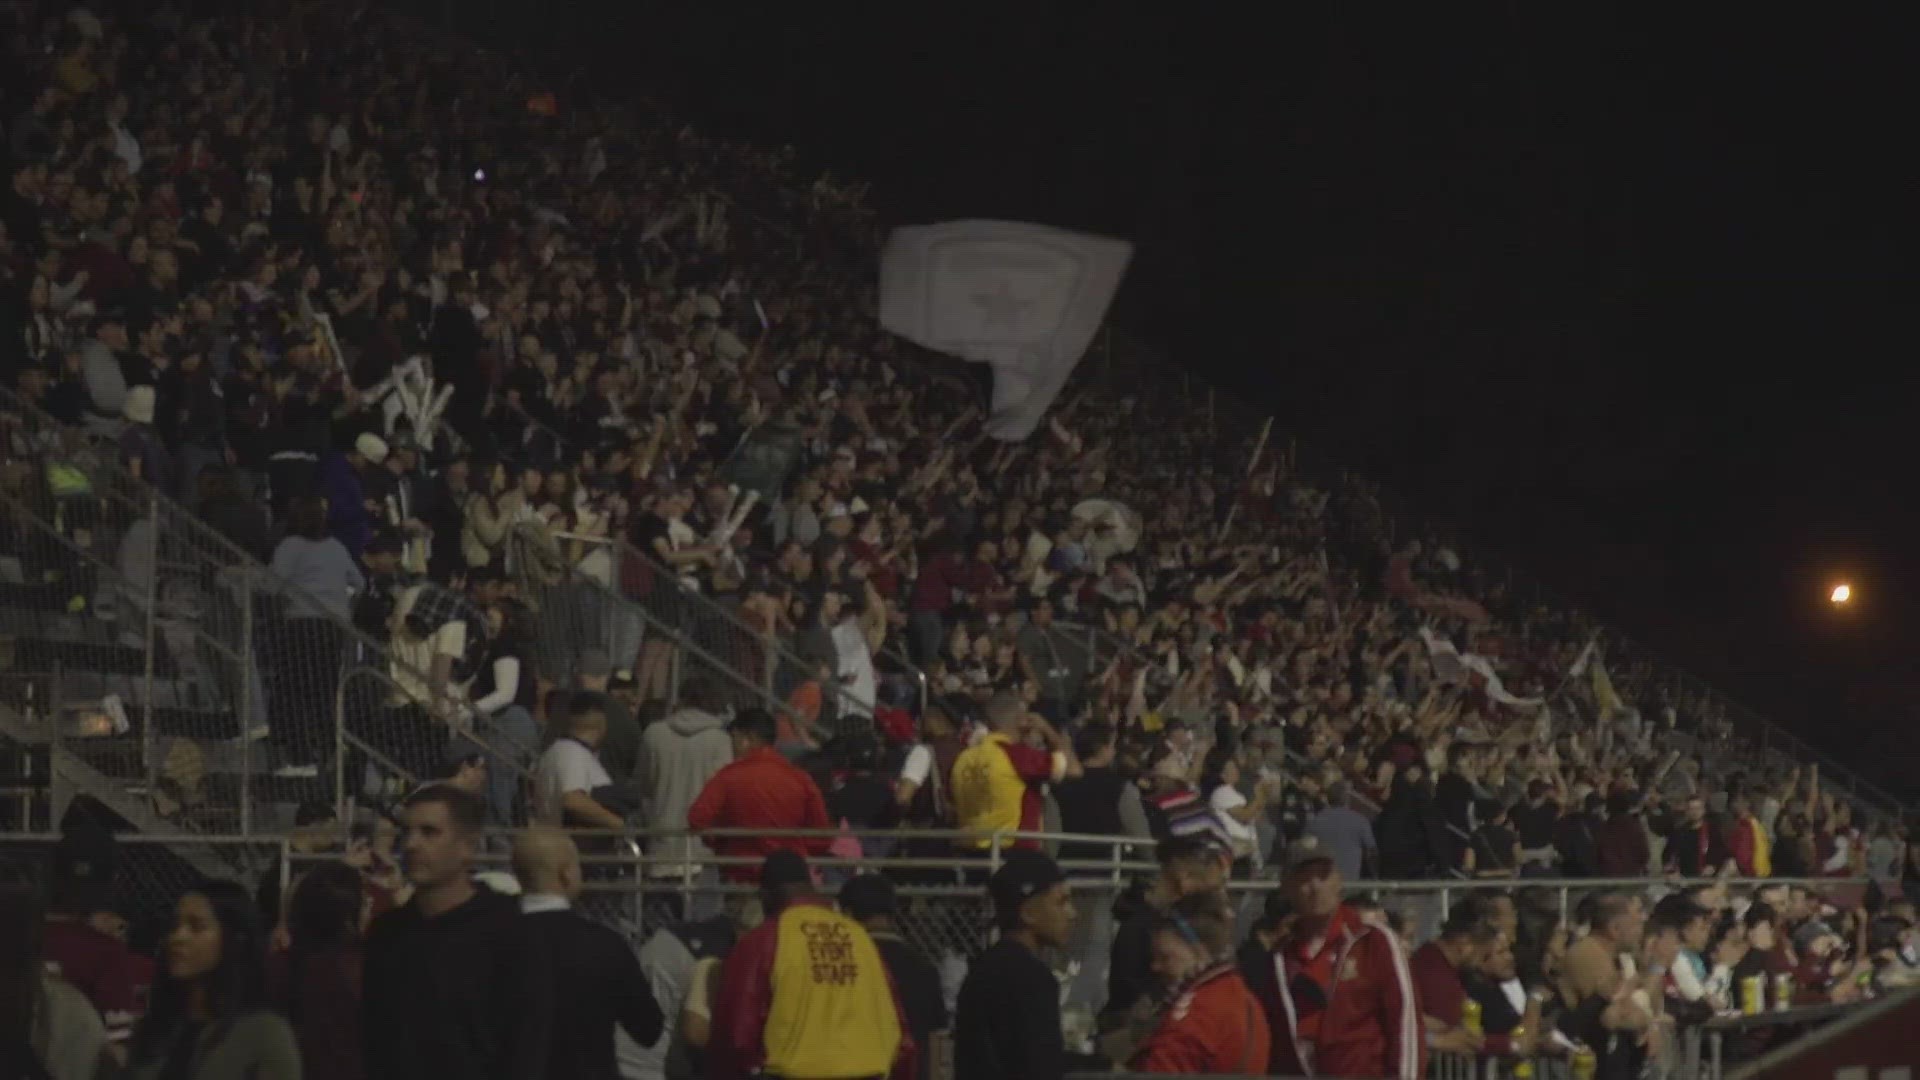 While Sac Republic lost 1-2 against Phoenix Rising, most fans were still happy to have been part of the journey.